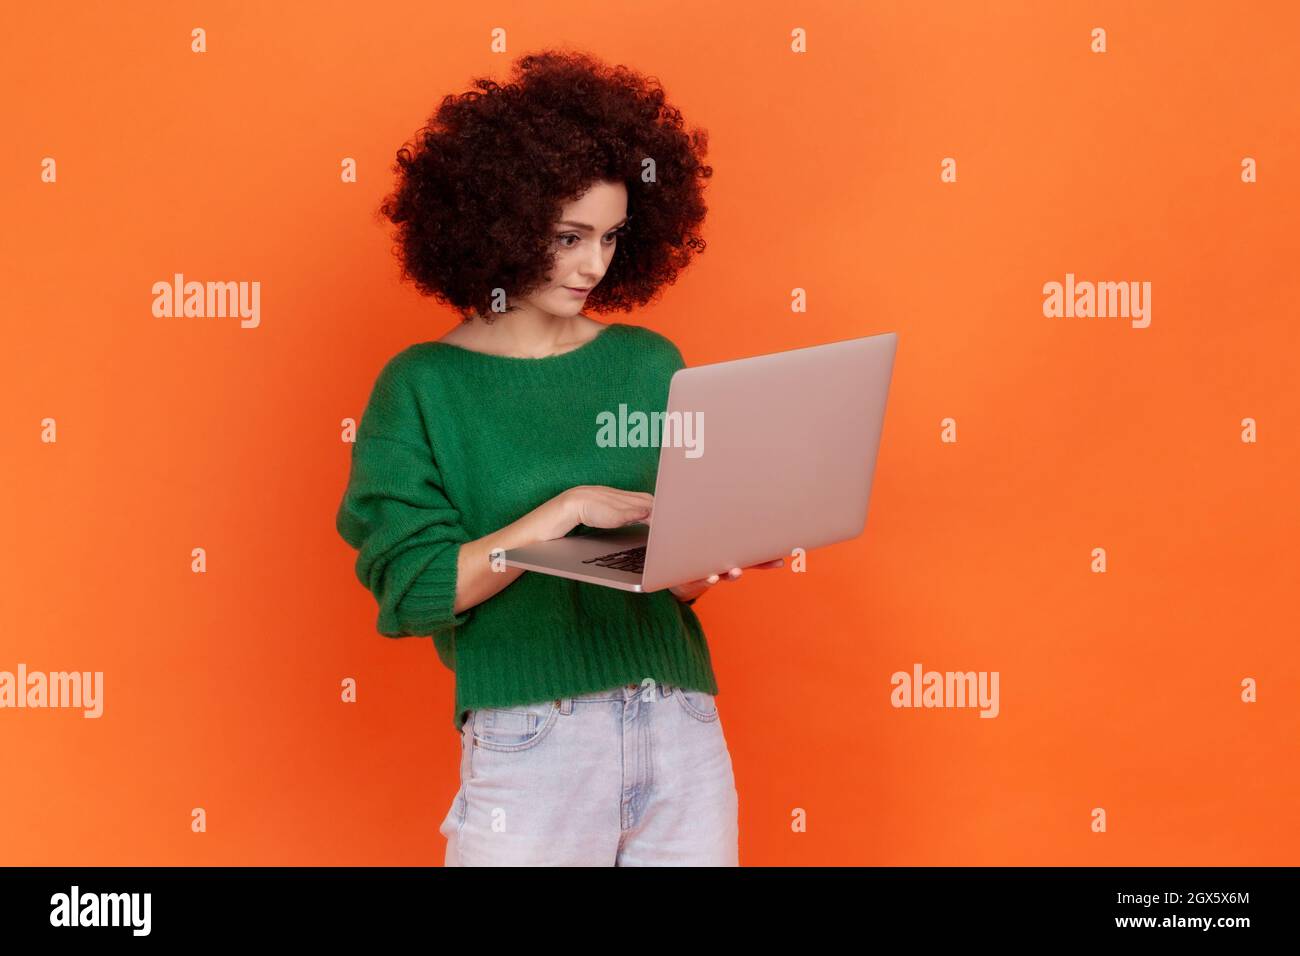 Portrait of attractive concentrated woman with Afro hairstyle wearing green casual style sweater holding laptop, freelancer working online. Indoor studio shot isolated on orange background. Stock Photo